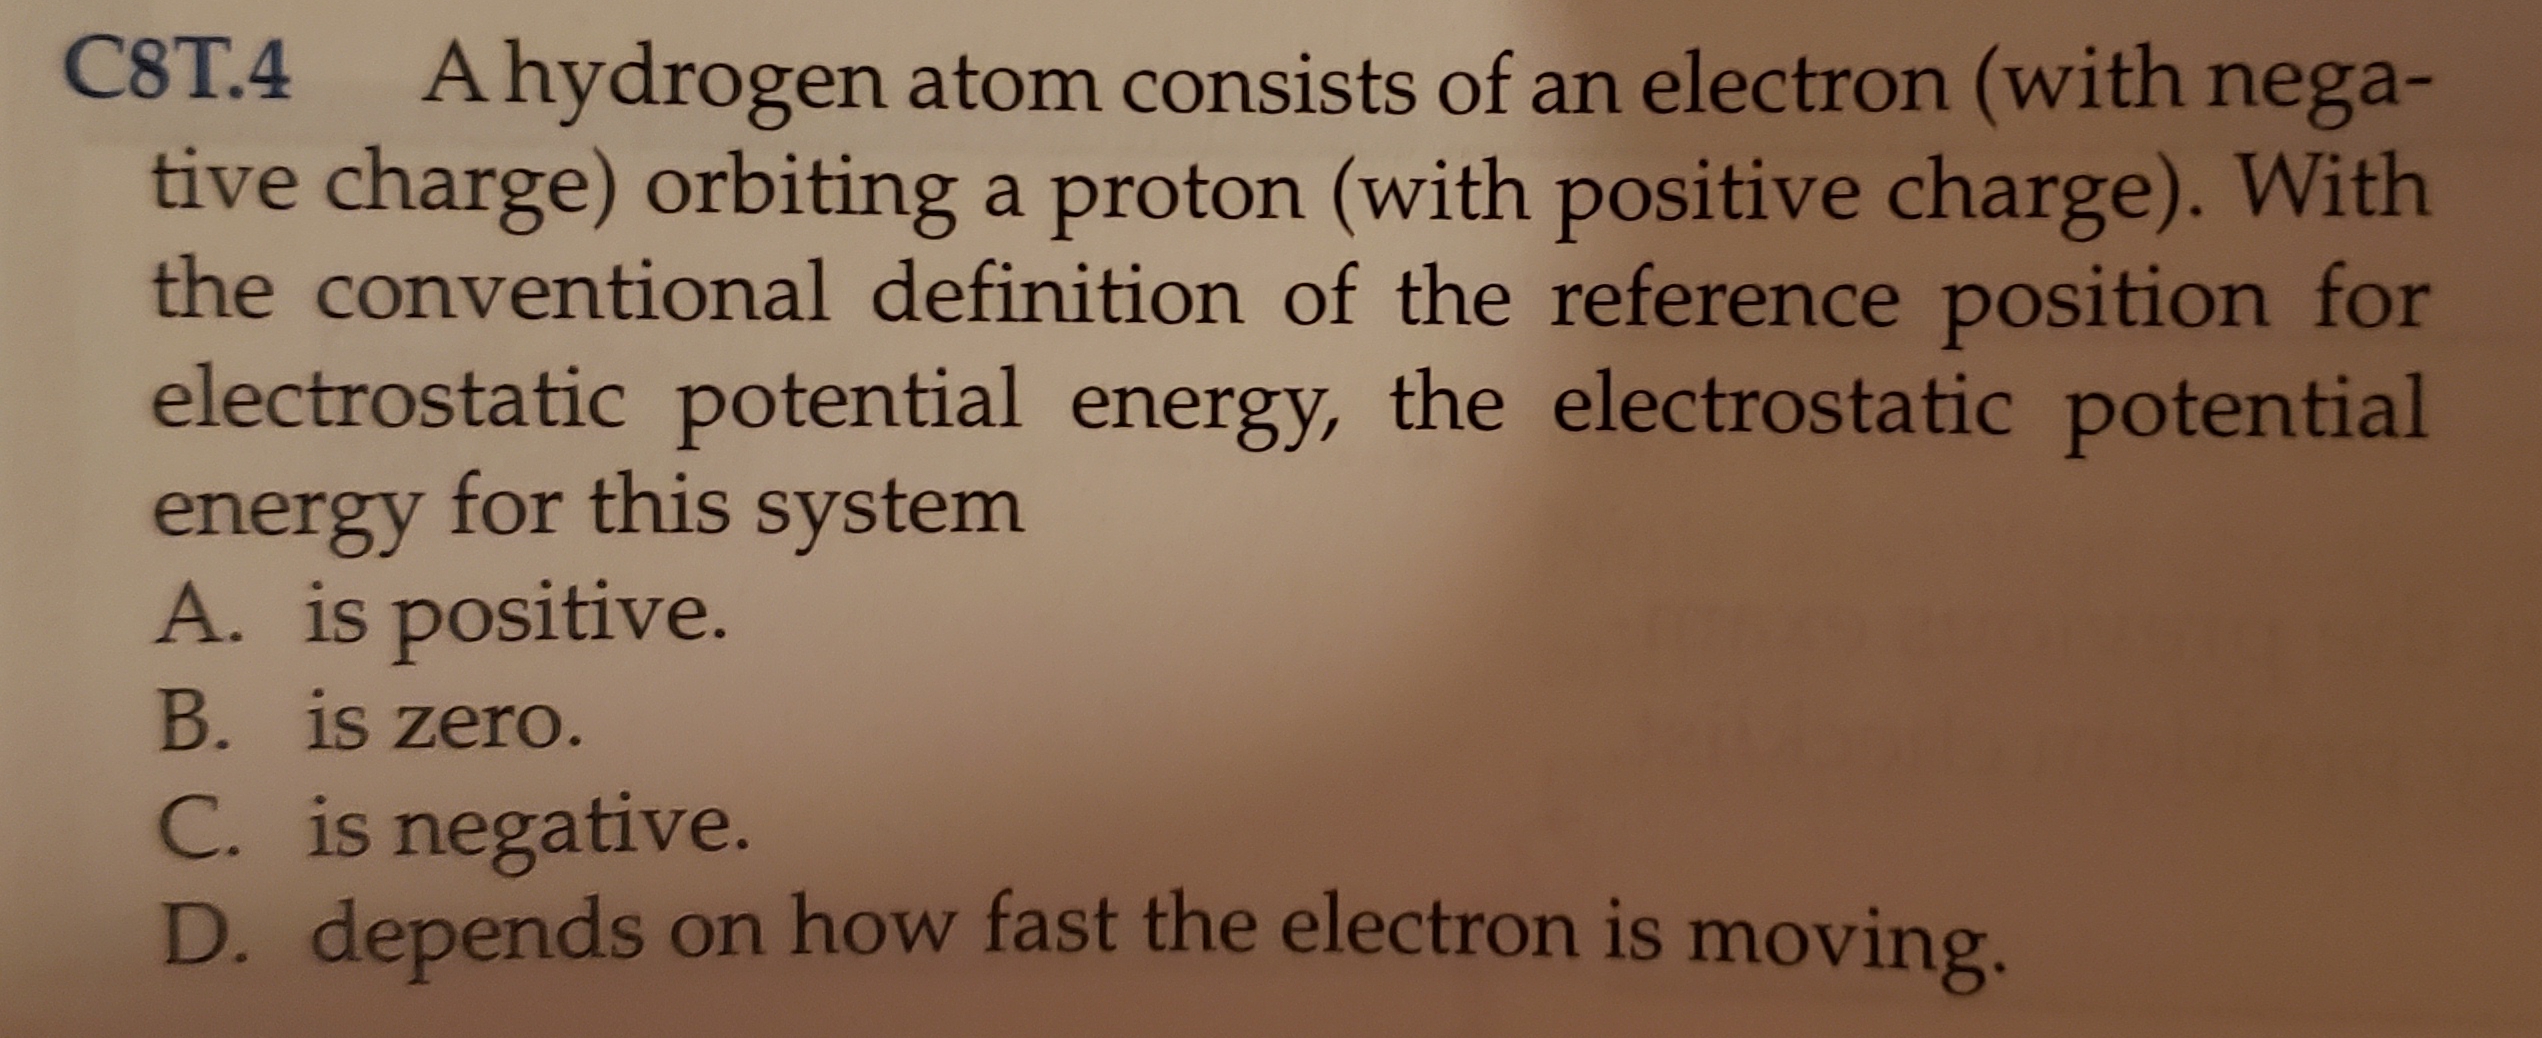 C8T.4 Ahydrogen atom consists of an electron (with nega-
tive charge) orbiting a proton (with positive charge). With
the conventional definition of the reference position for
electrostatic potential energy, the electrostatic potential
energy for this system
A. is positive.
B. is zero.
C. is negative.
D. depends on how fast the electron is moving.
